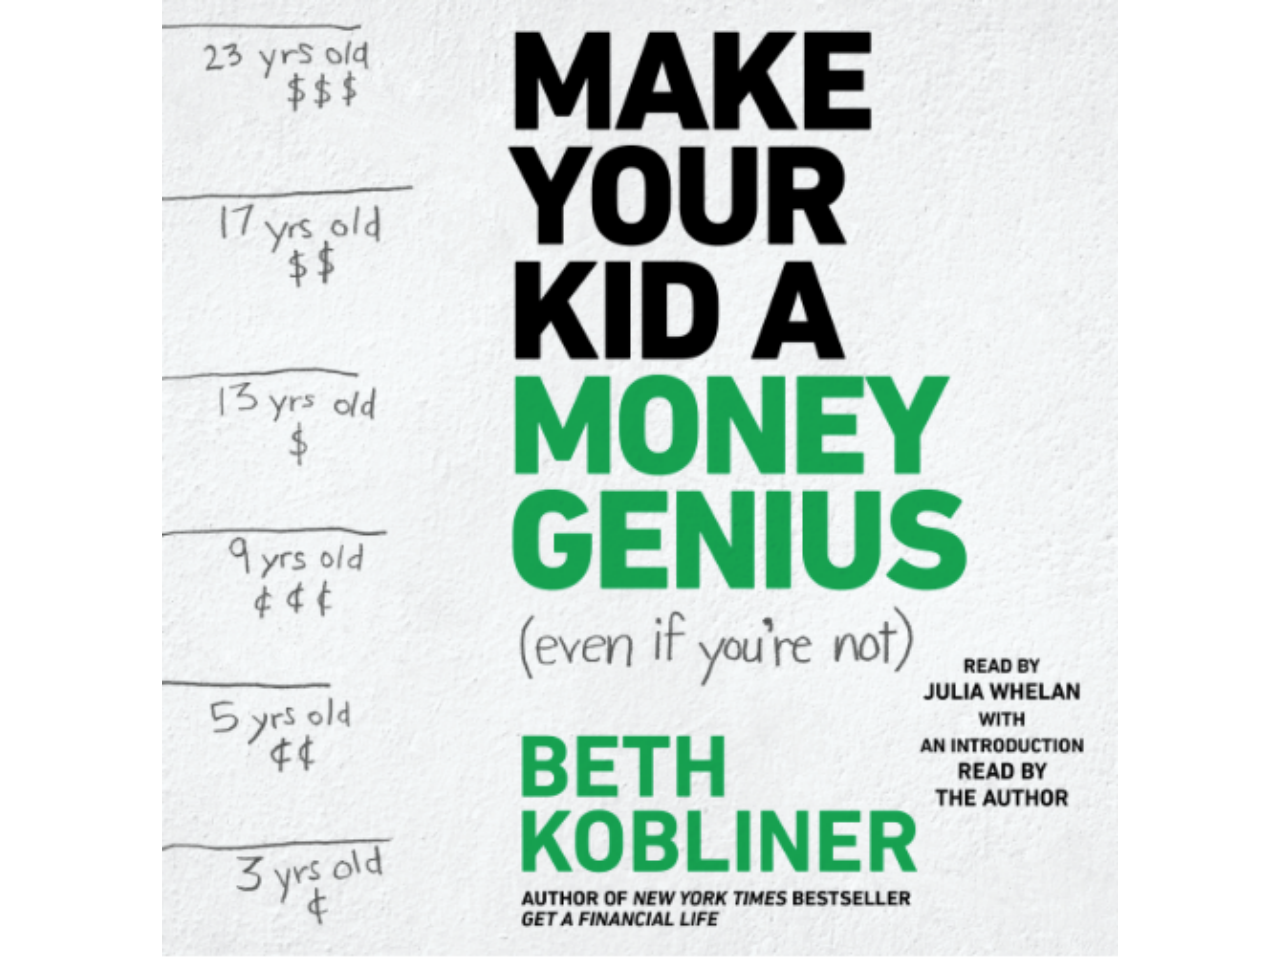 Cover of book "Make your kid a money genius (even if you're not)"